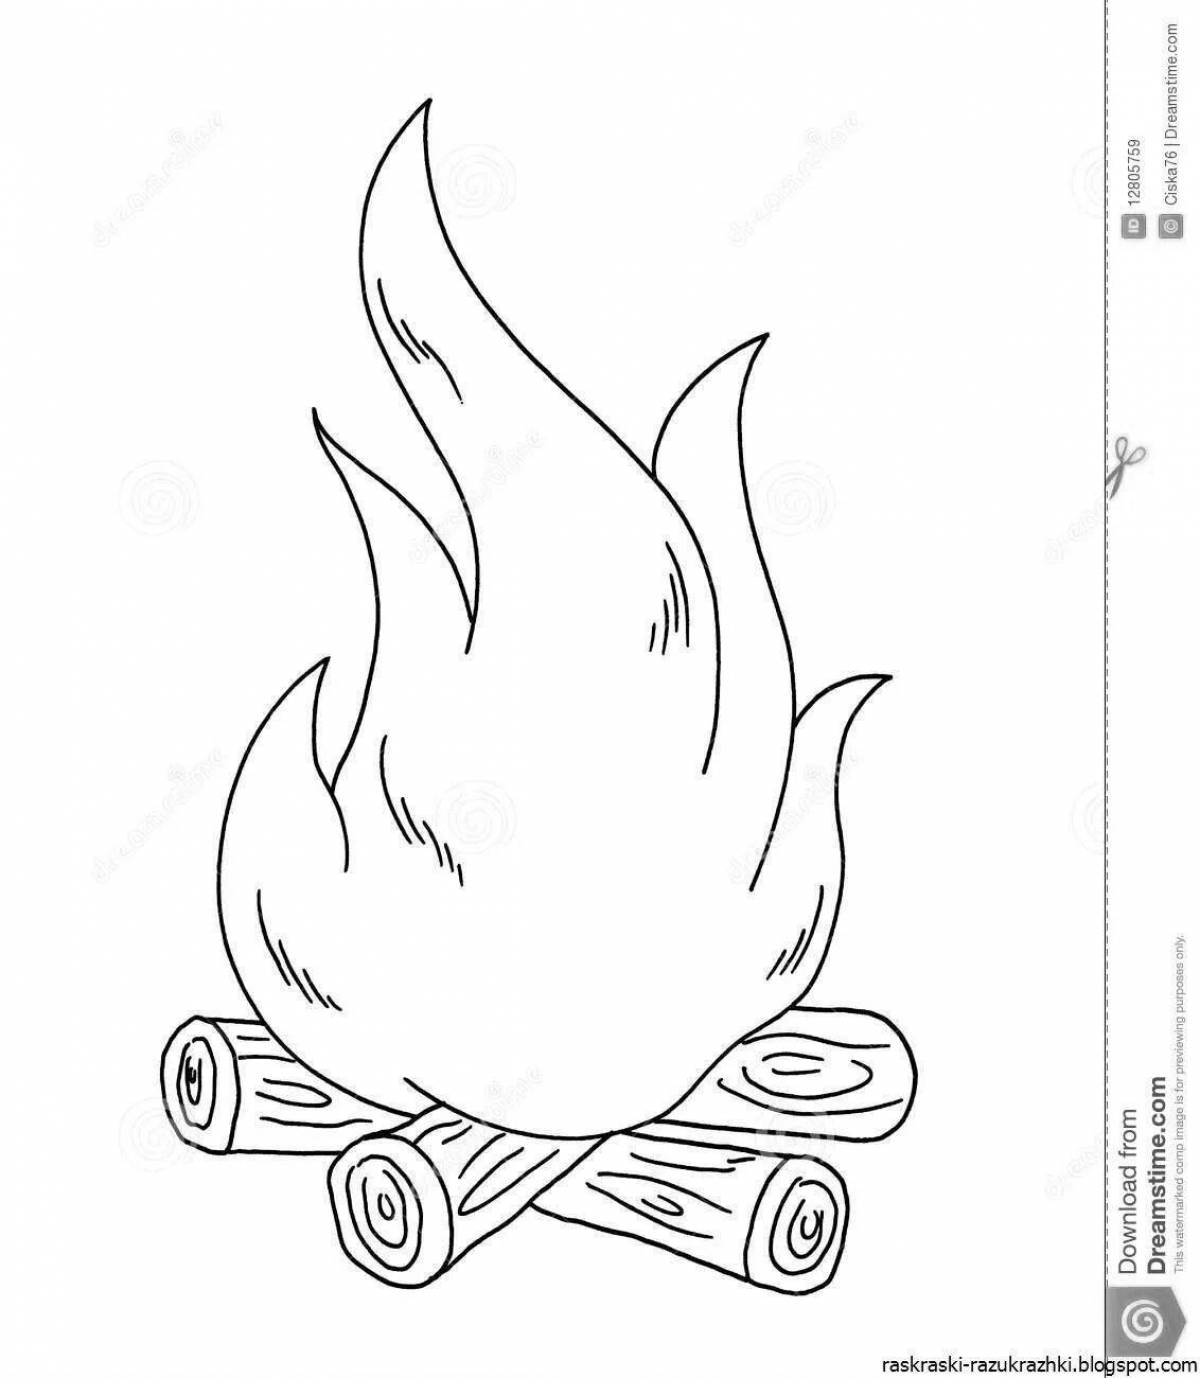 Shining light coloring page